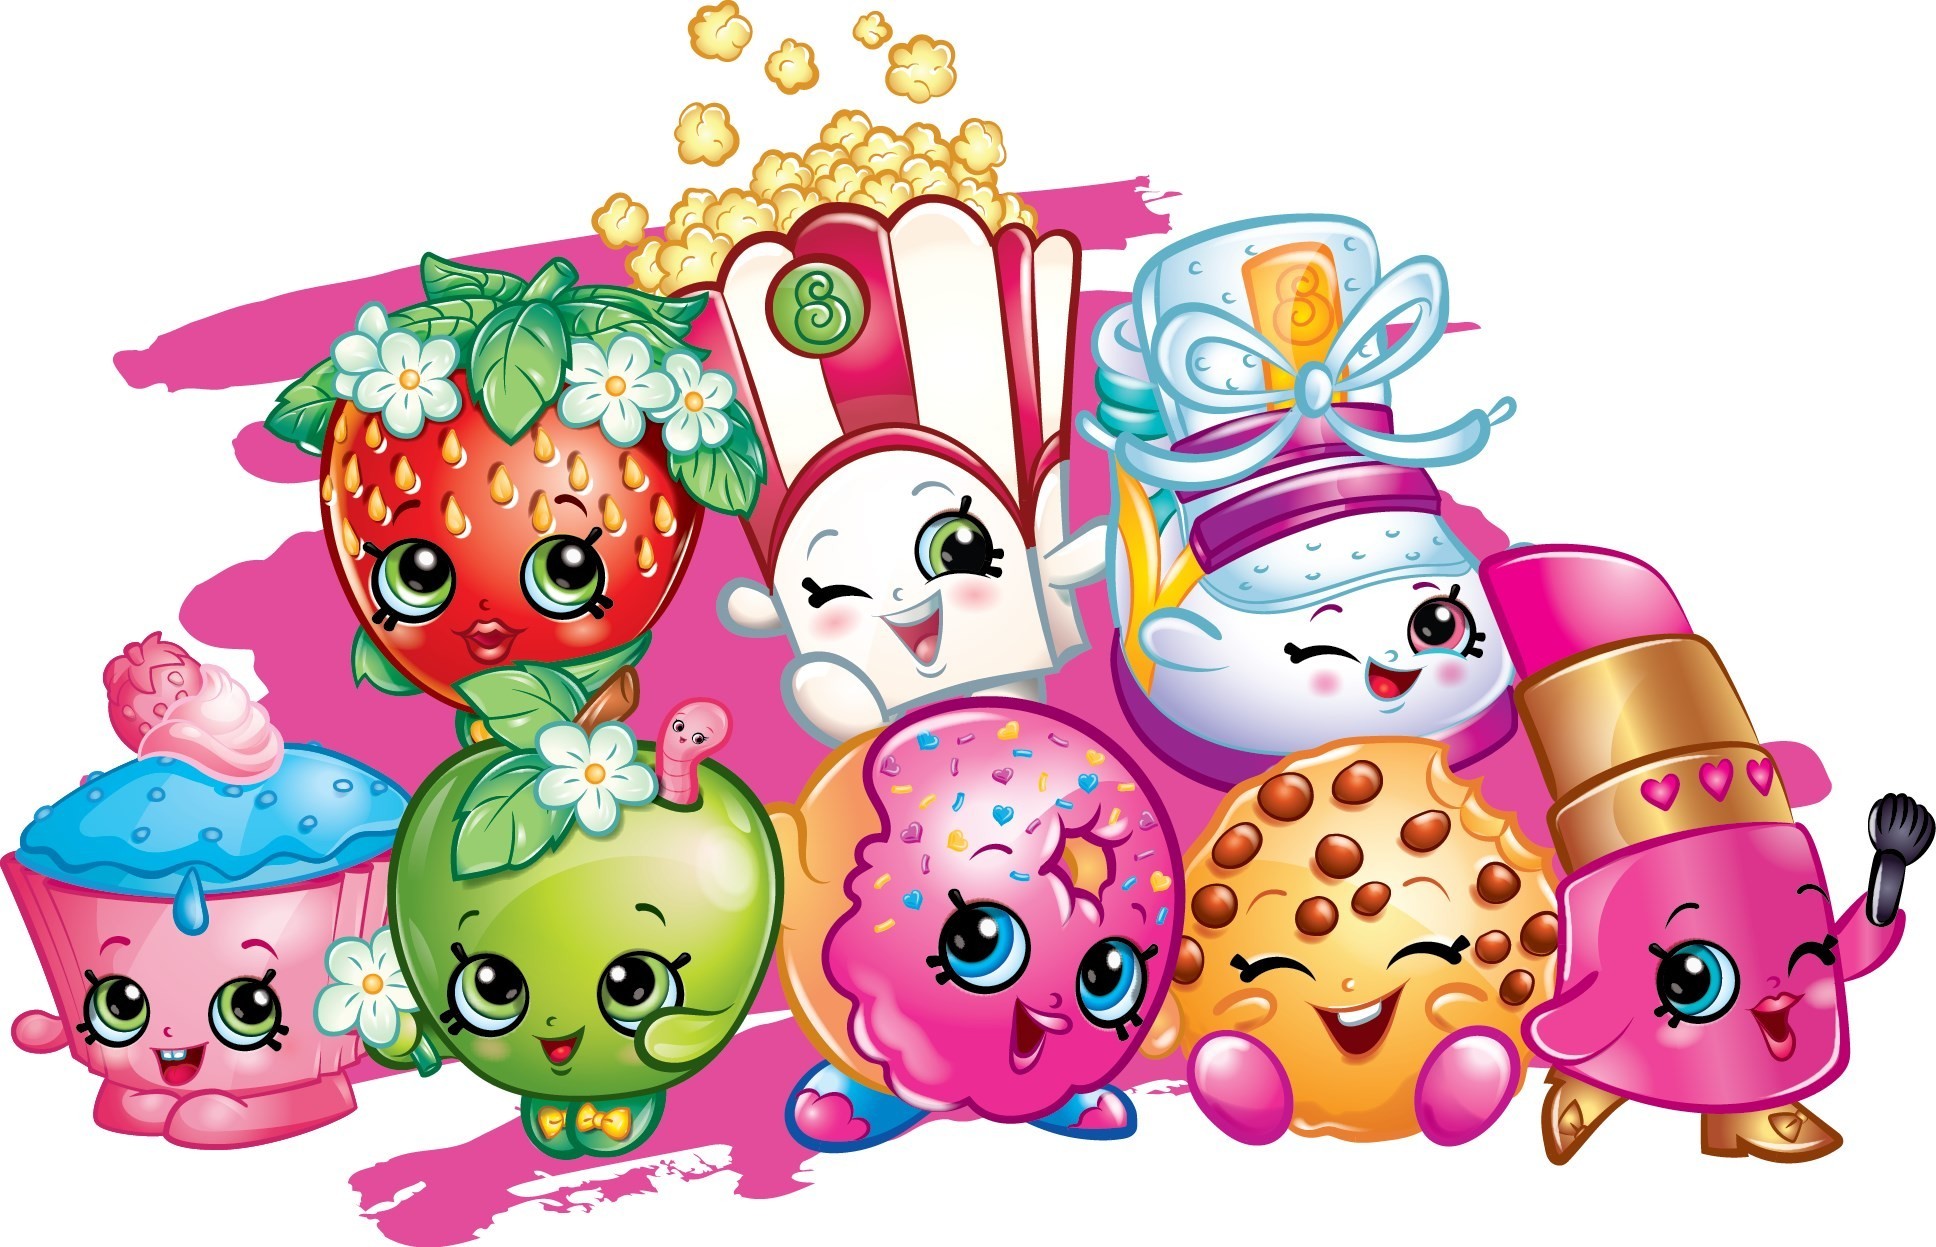 Free Download 1936x1247 Download Original Size Shopkins Clipart 1936x1247 [1936x1247] For Your